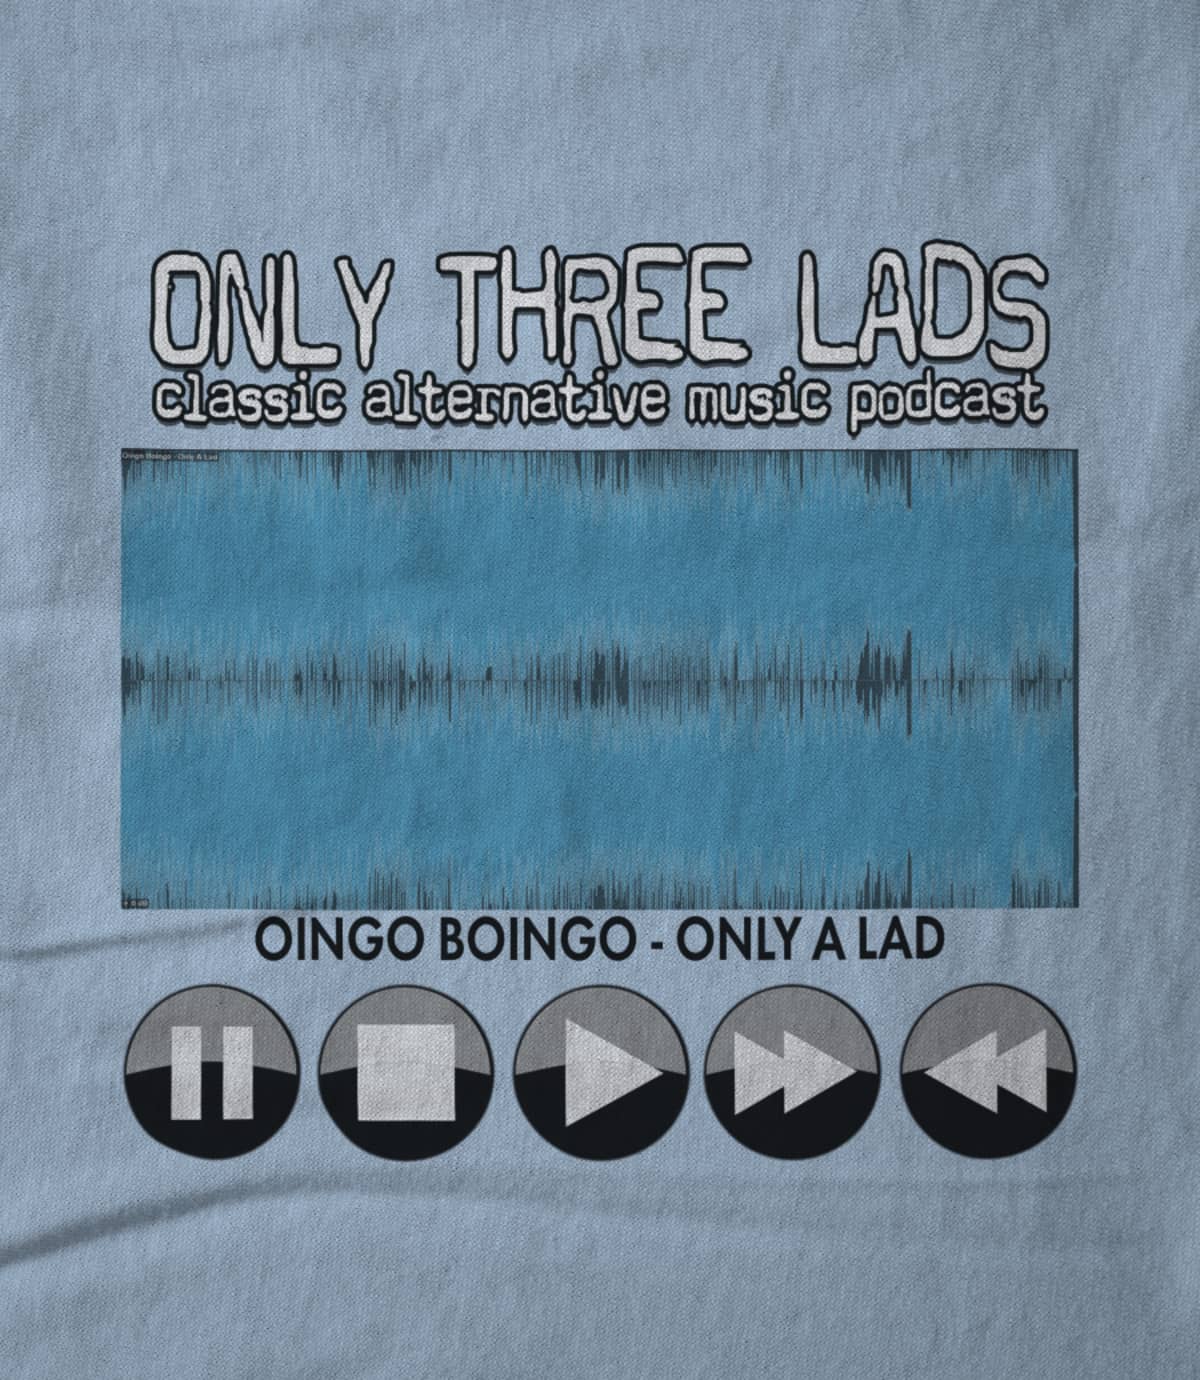 Only Three Lads